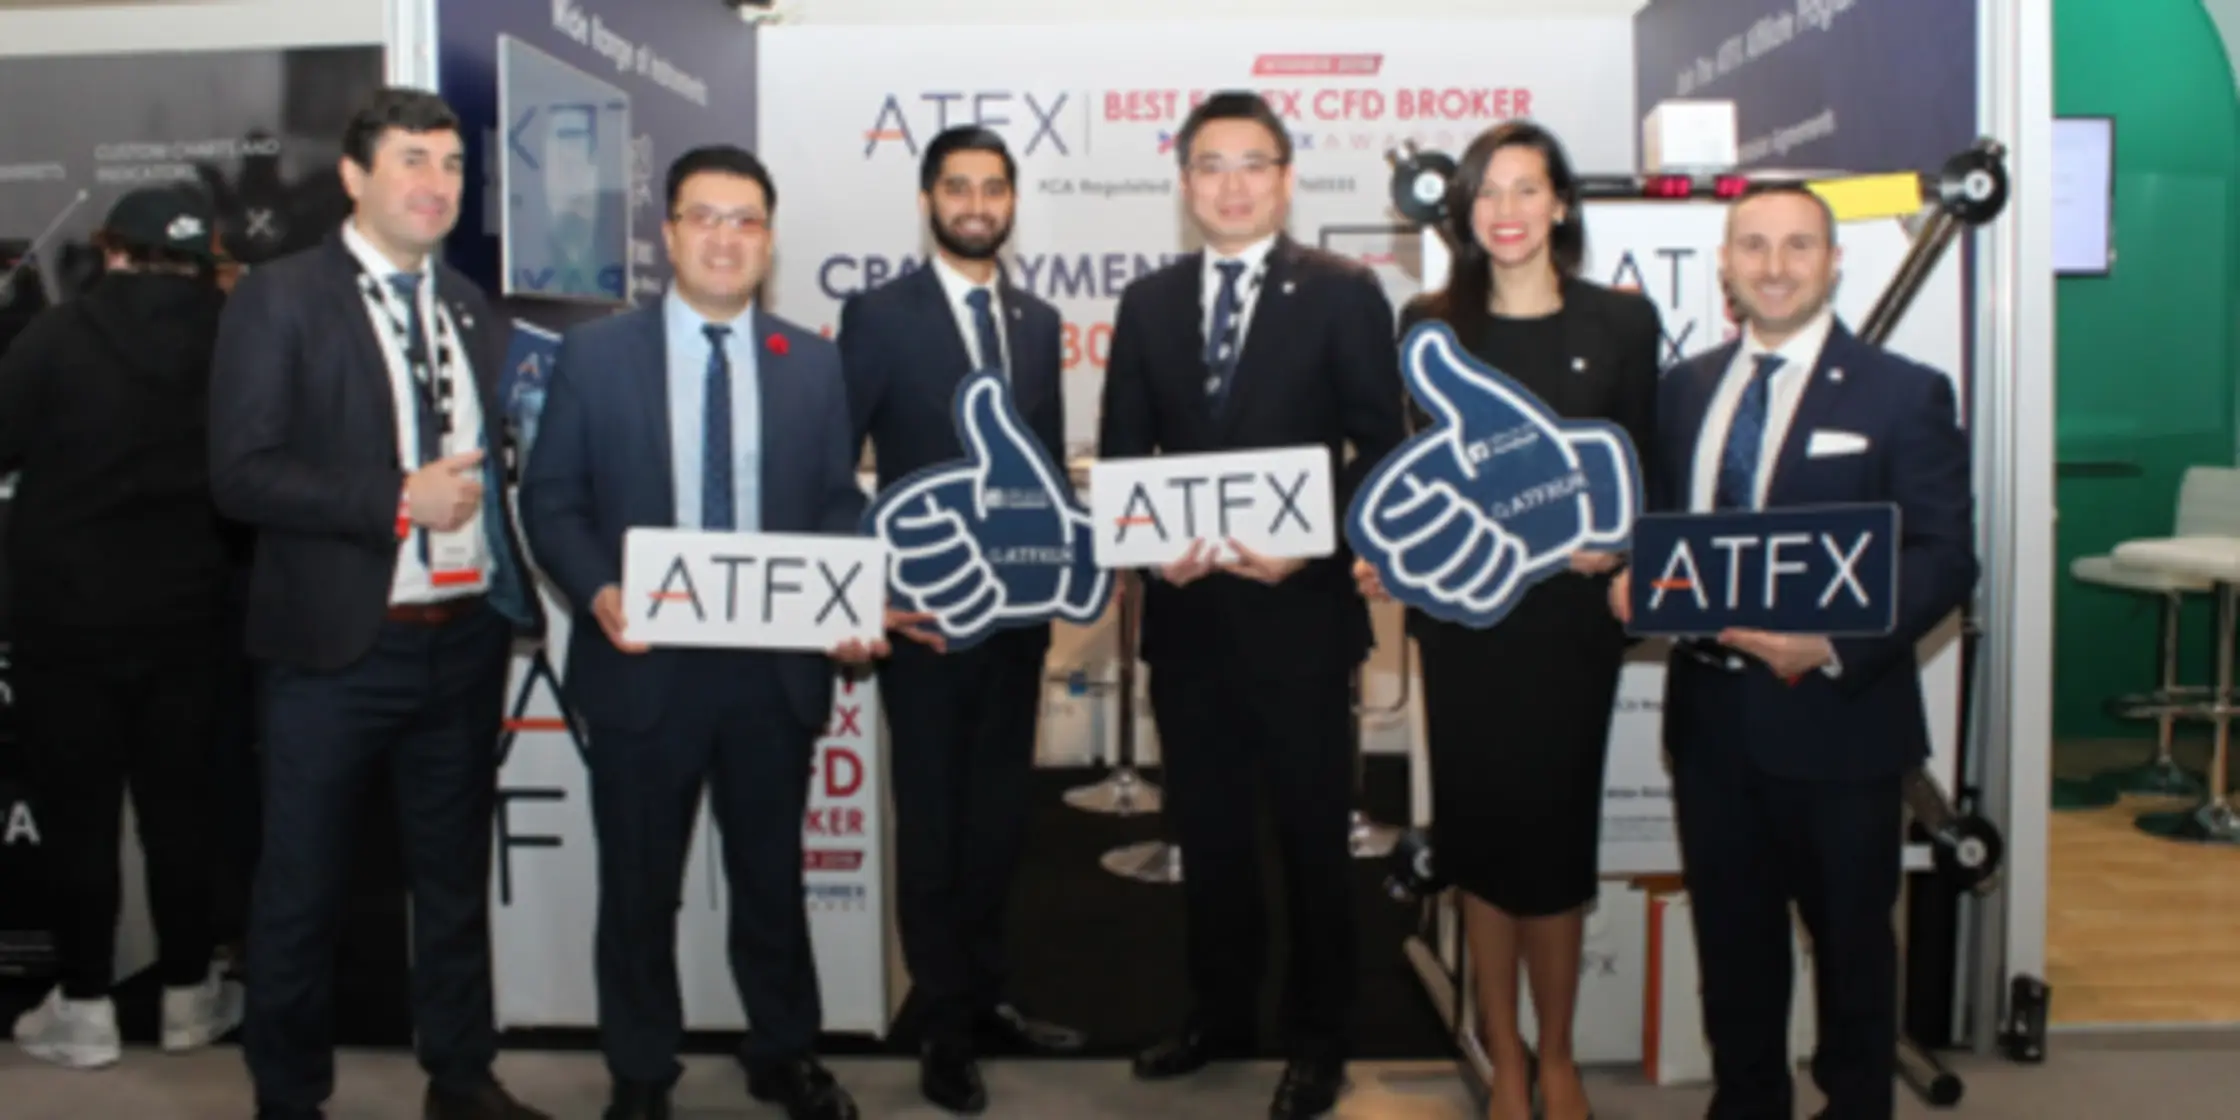 ATFX london conference